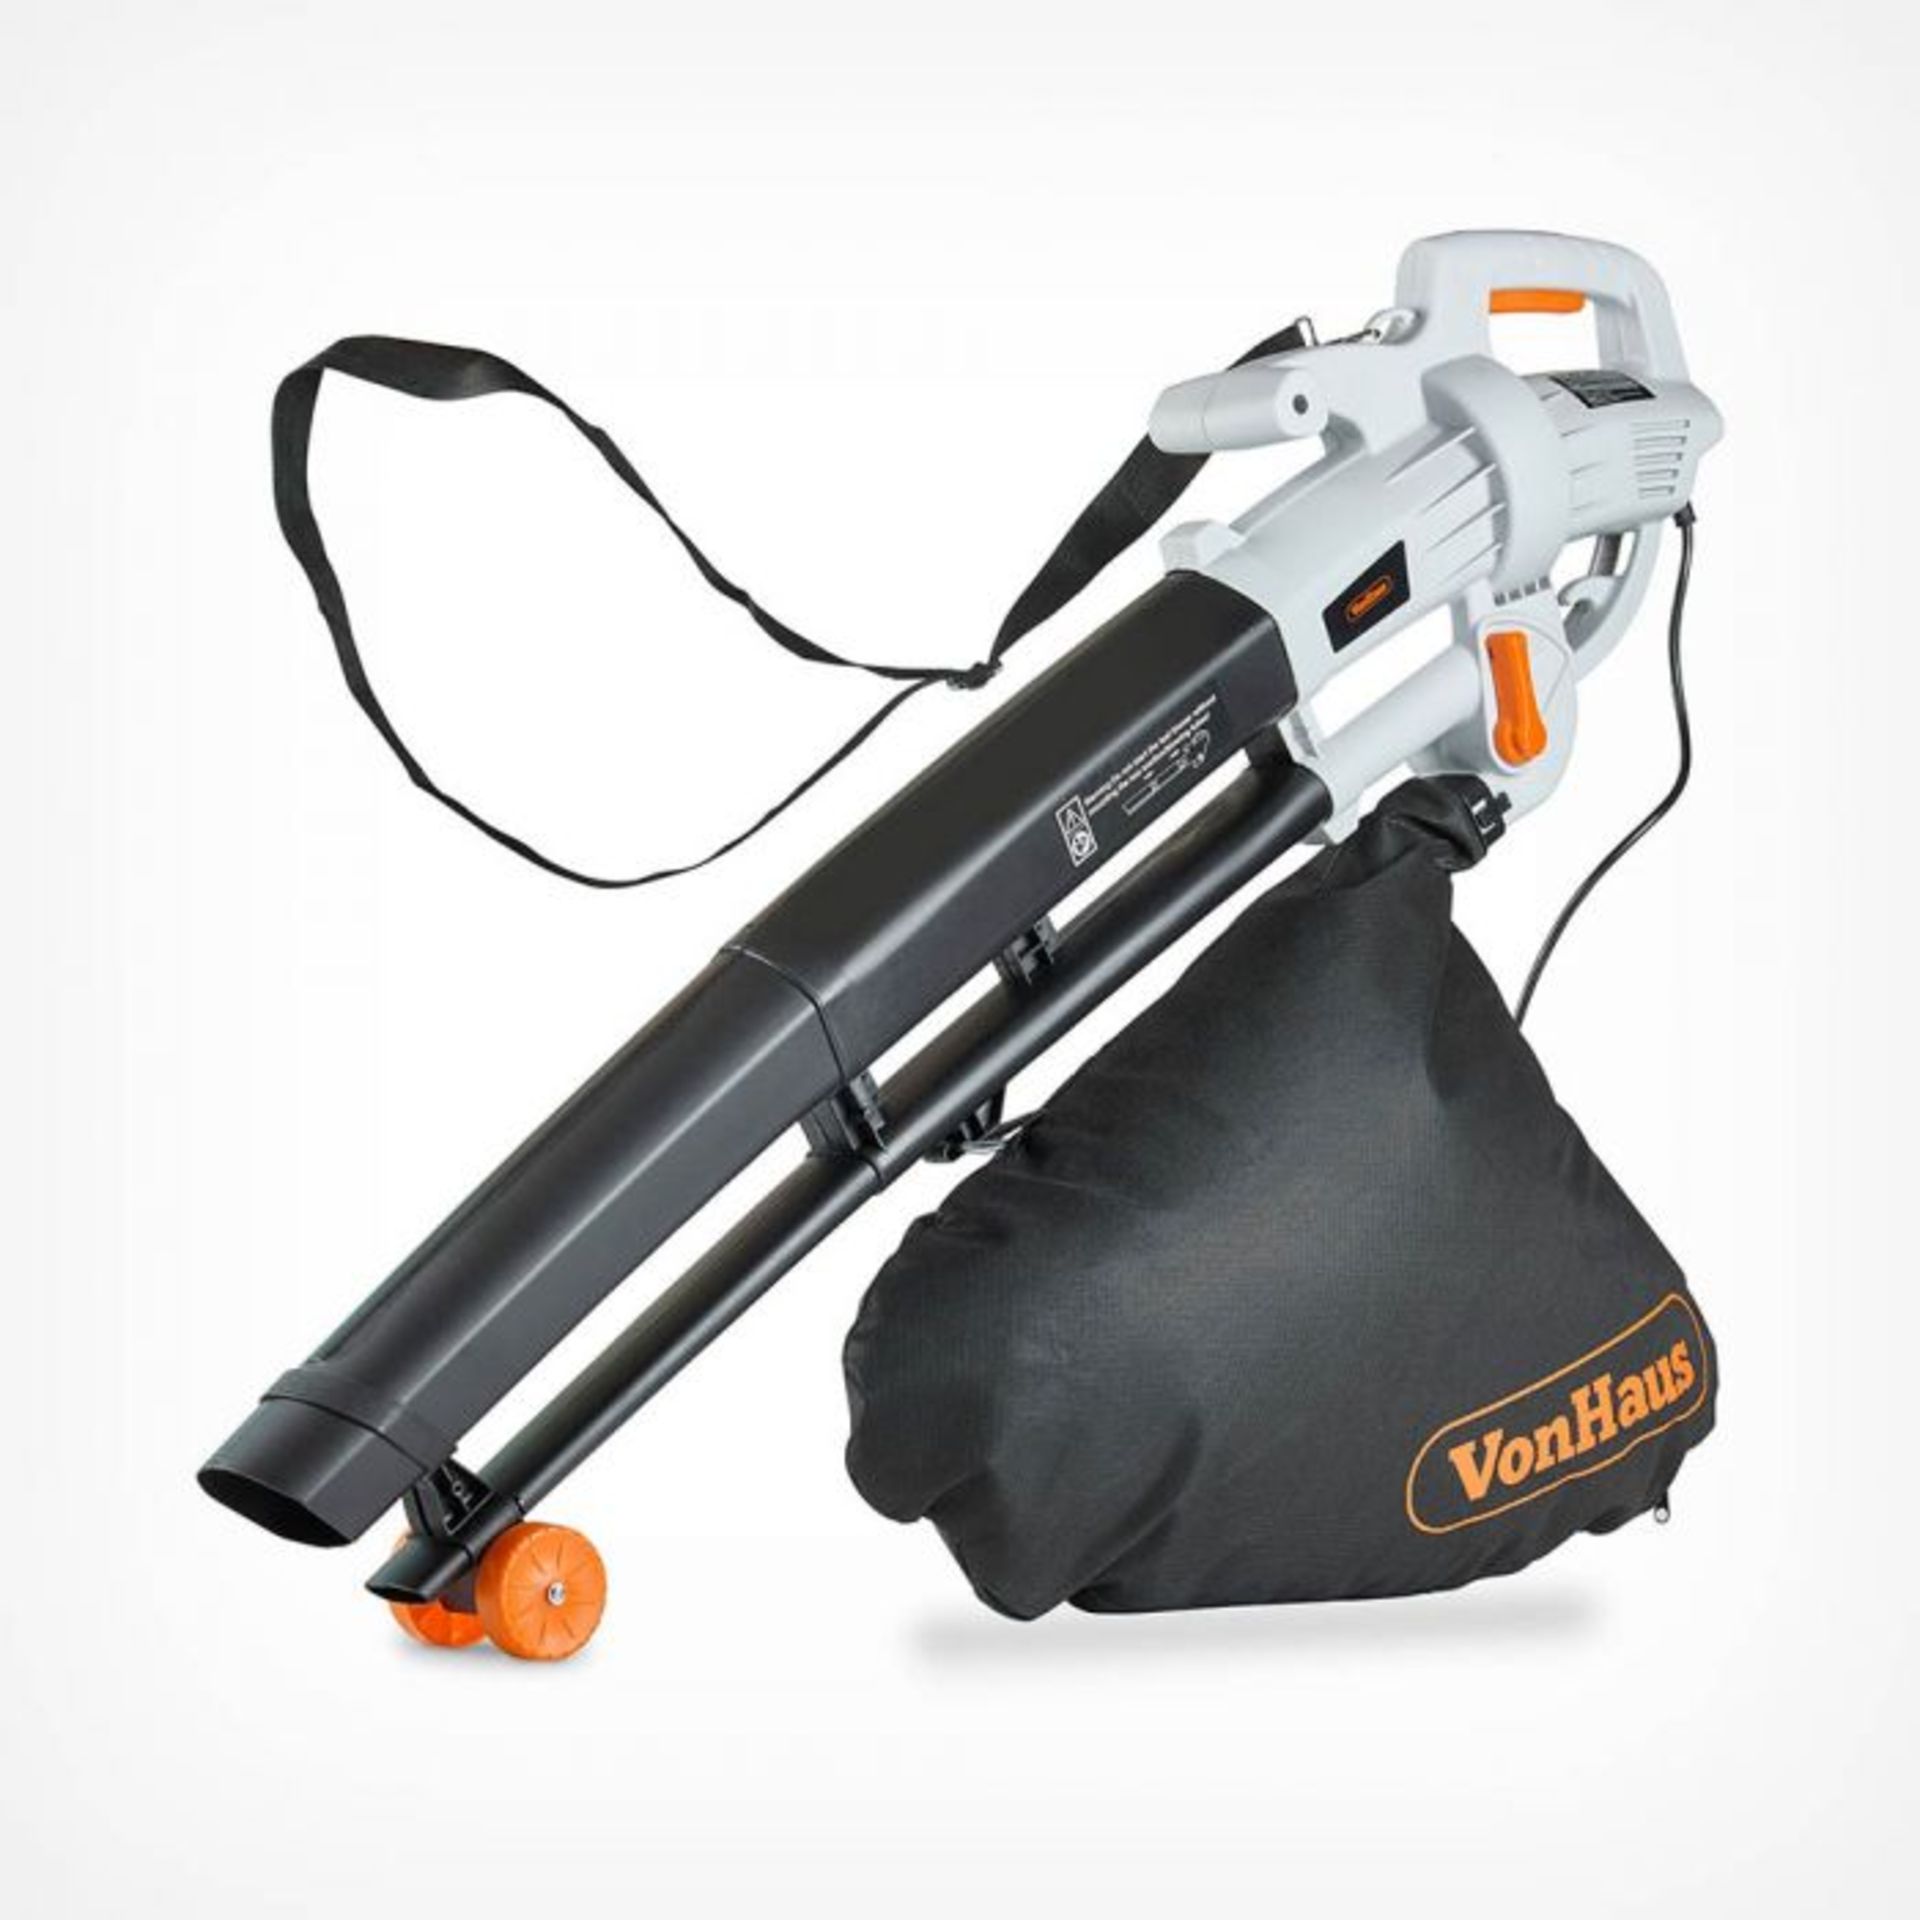 3 in 1 Leaf Blower. The 3000W Leaf Blower is ideal for keeping lawns, patios and driveways tidy.